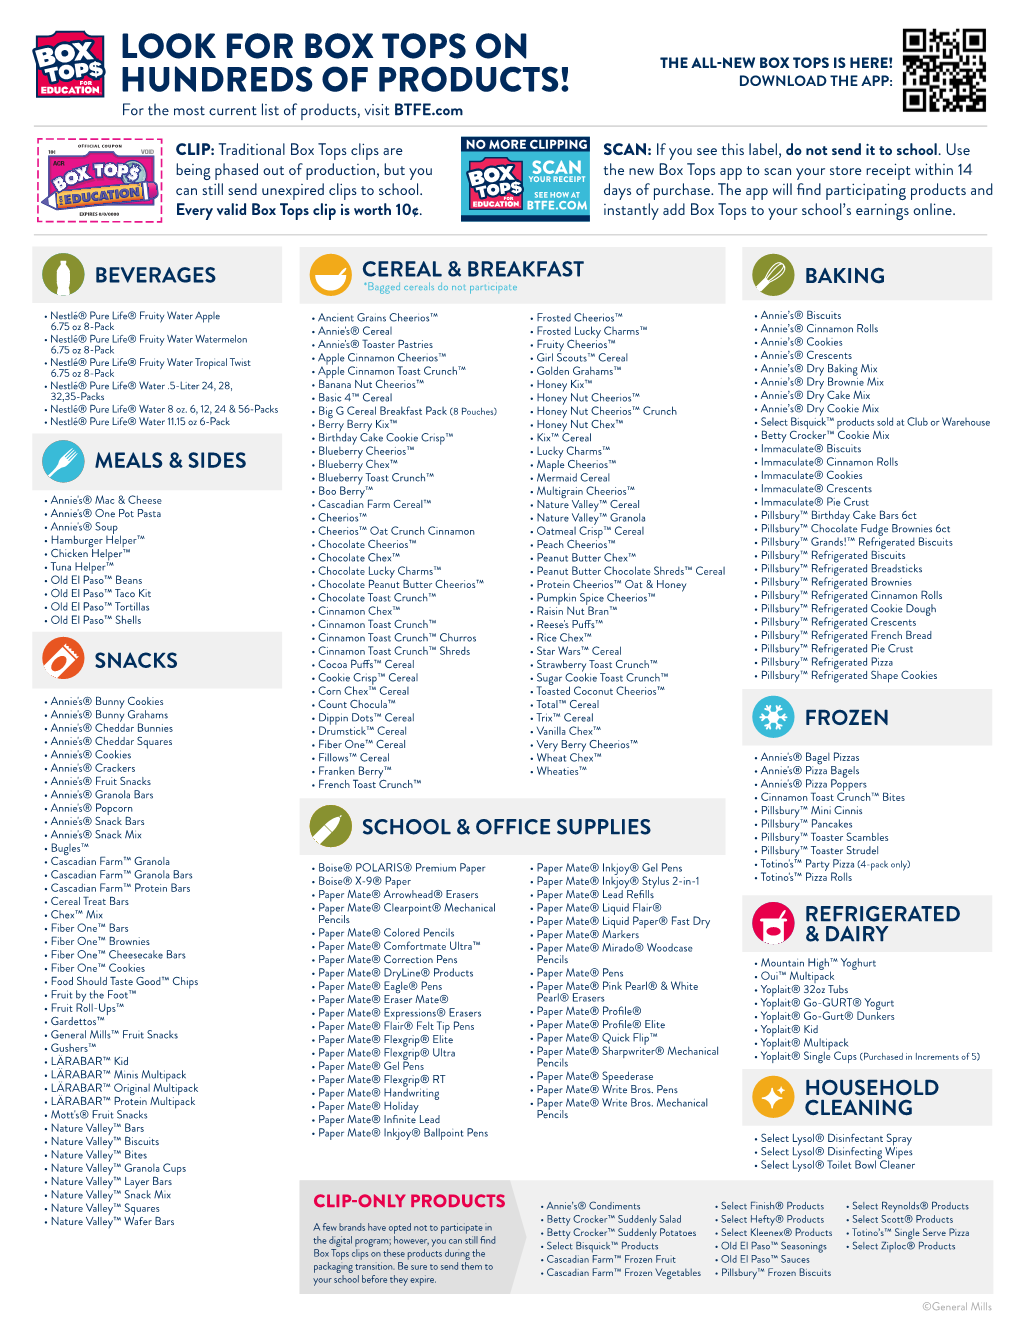 Look for Box Tops on Hundreds of Products!